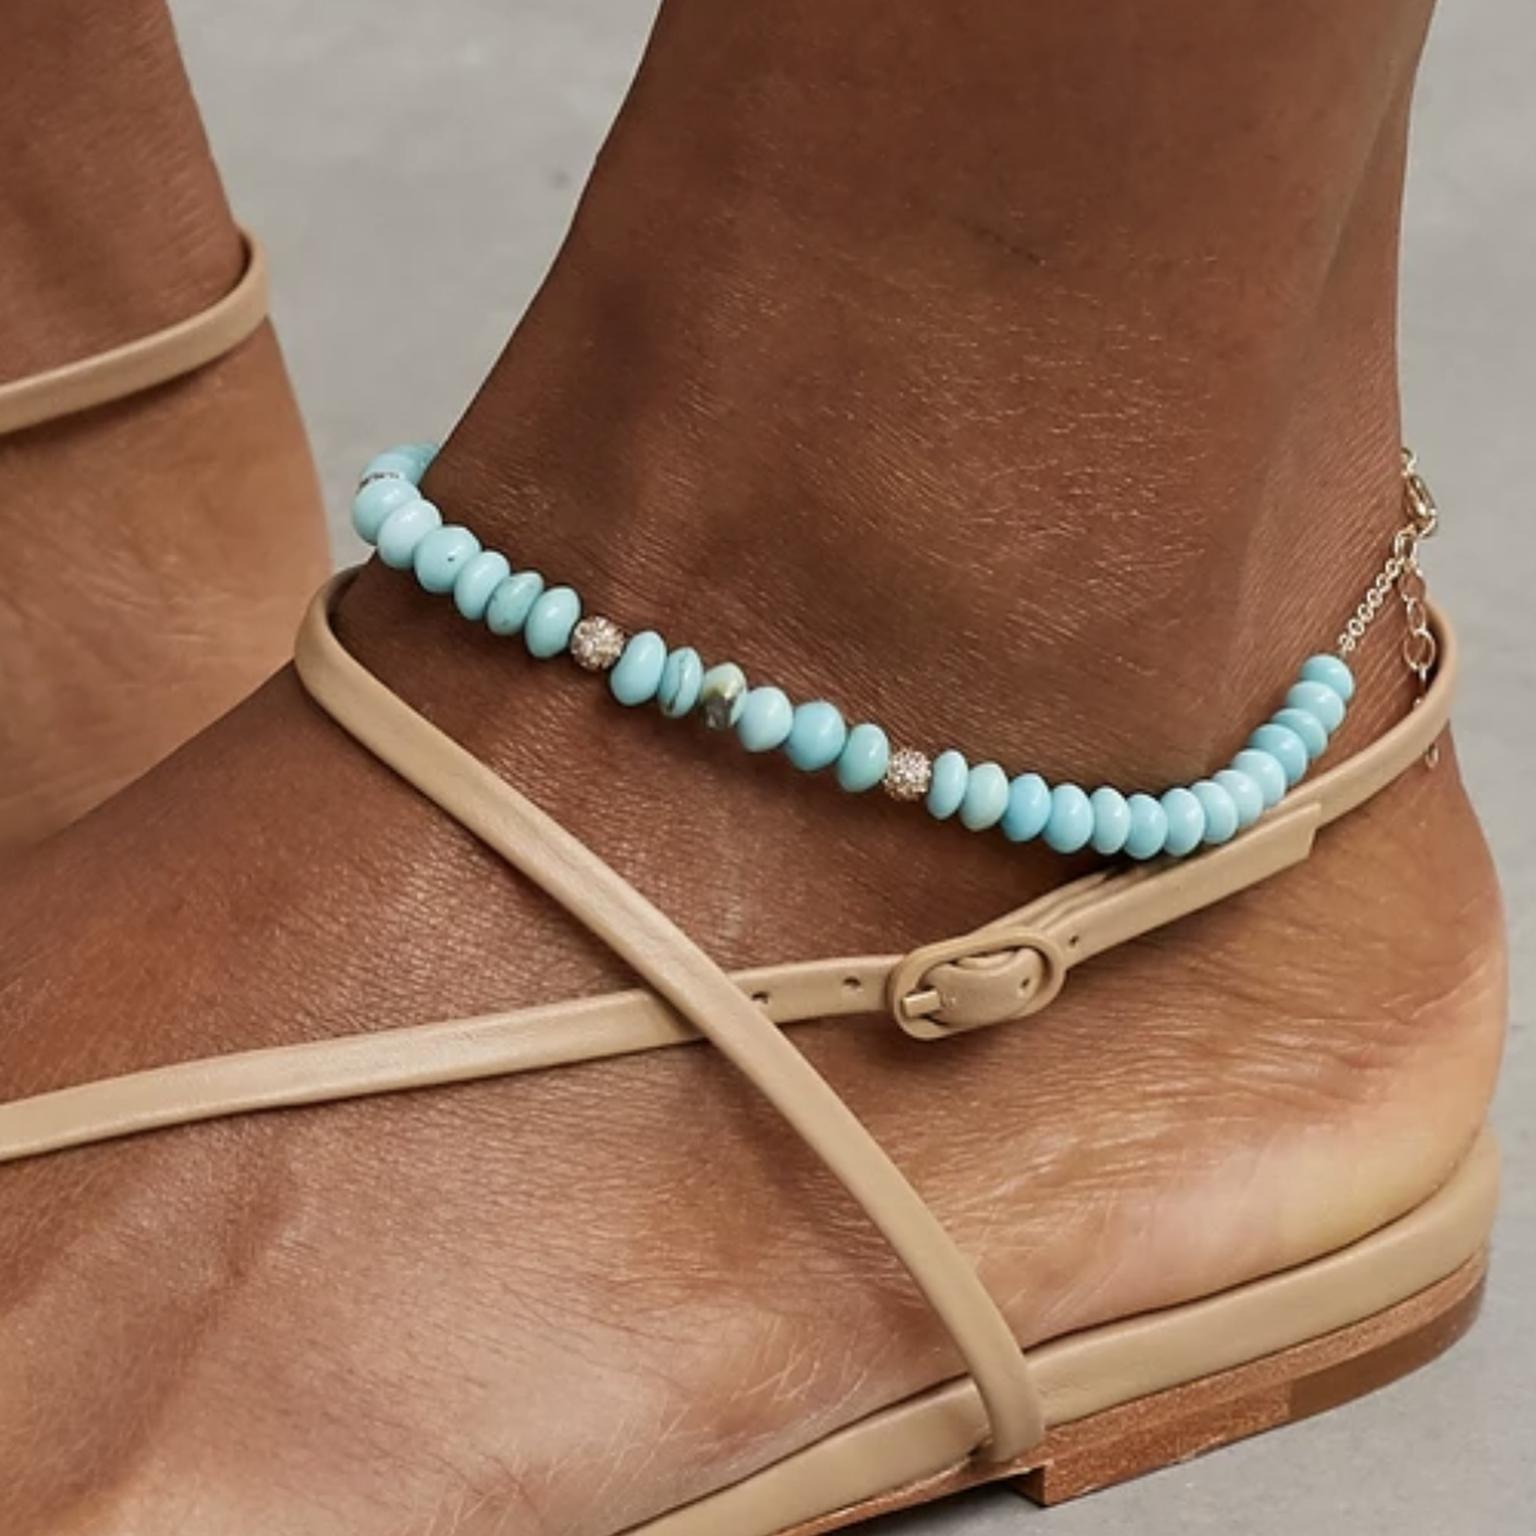 Turquoise anklet by Jacquie Aiche on model